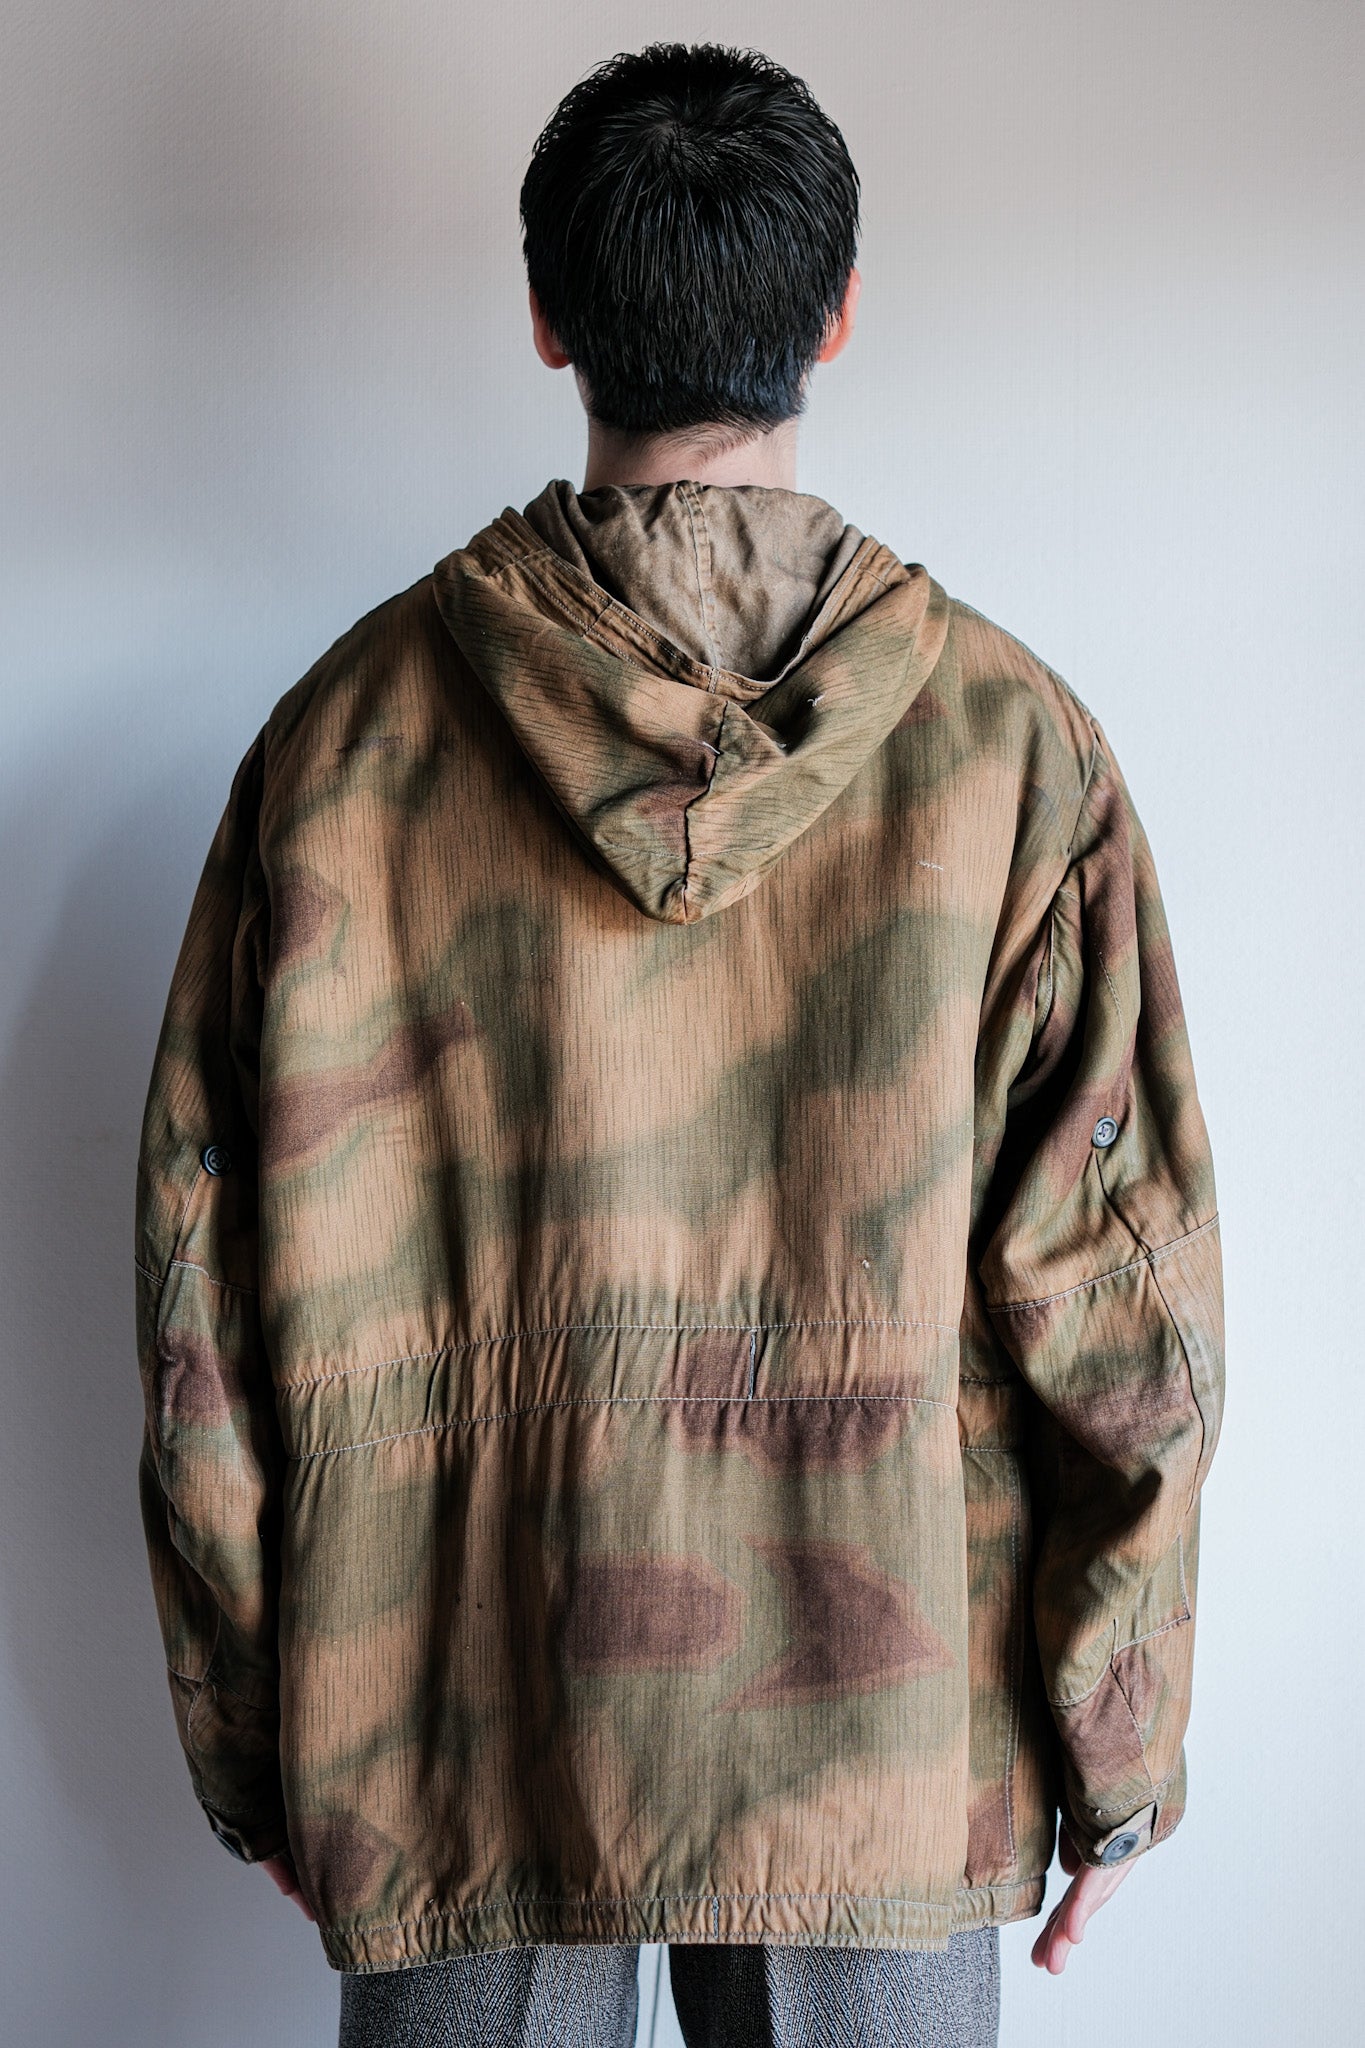 [~ 40's] WWⅱ Army allemand Sumpfternmster 44 Camouflage 43 Pattern hiver parka "Wehrmacht"